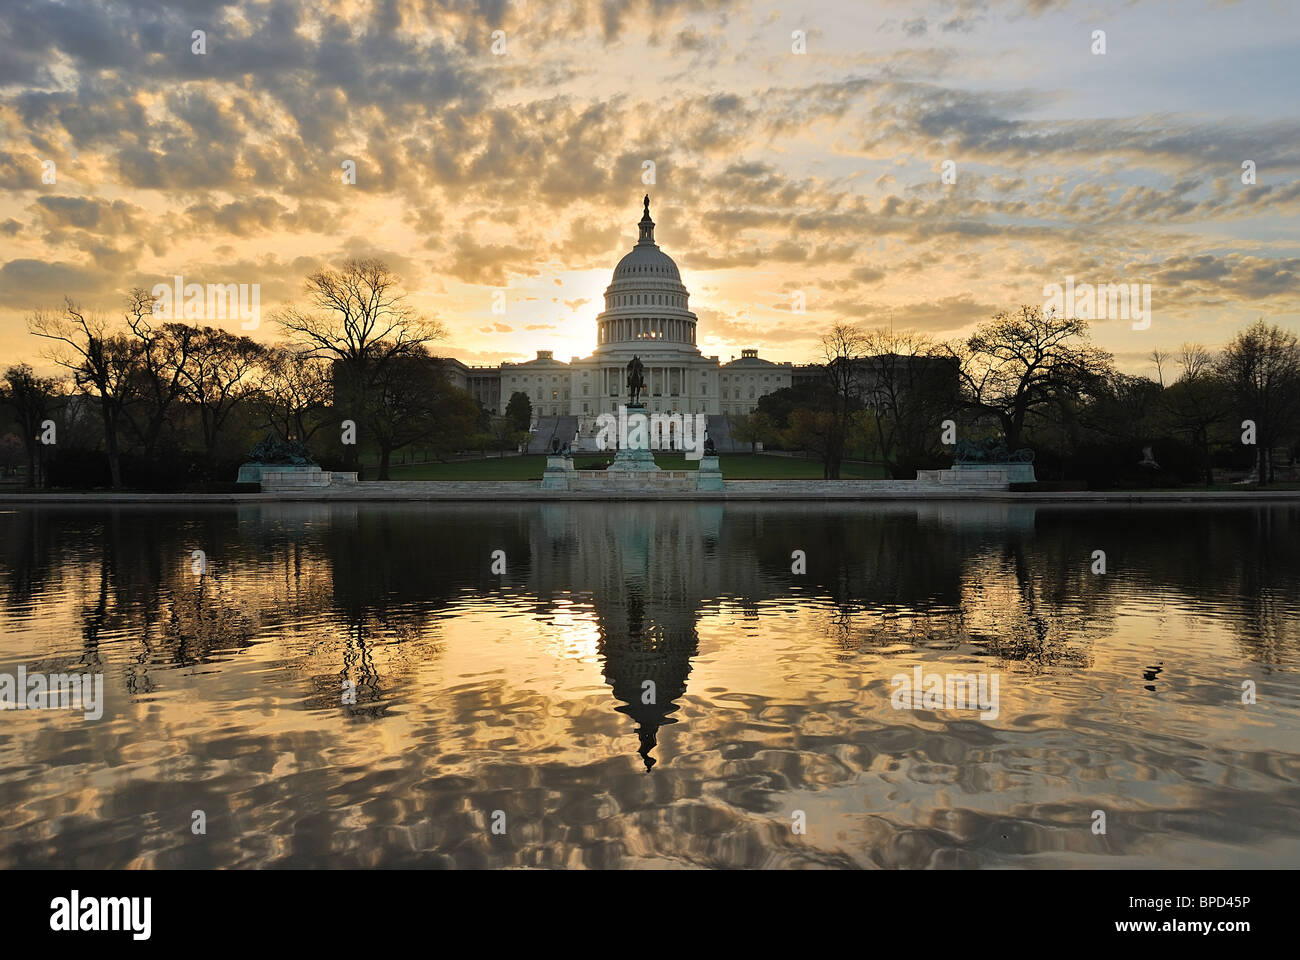 Capitol hill building in the morning with colorful cloud , Washington DC. Stock Photo